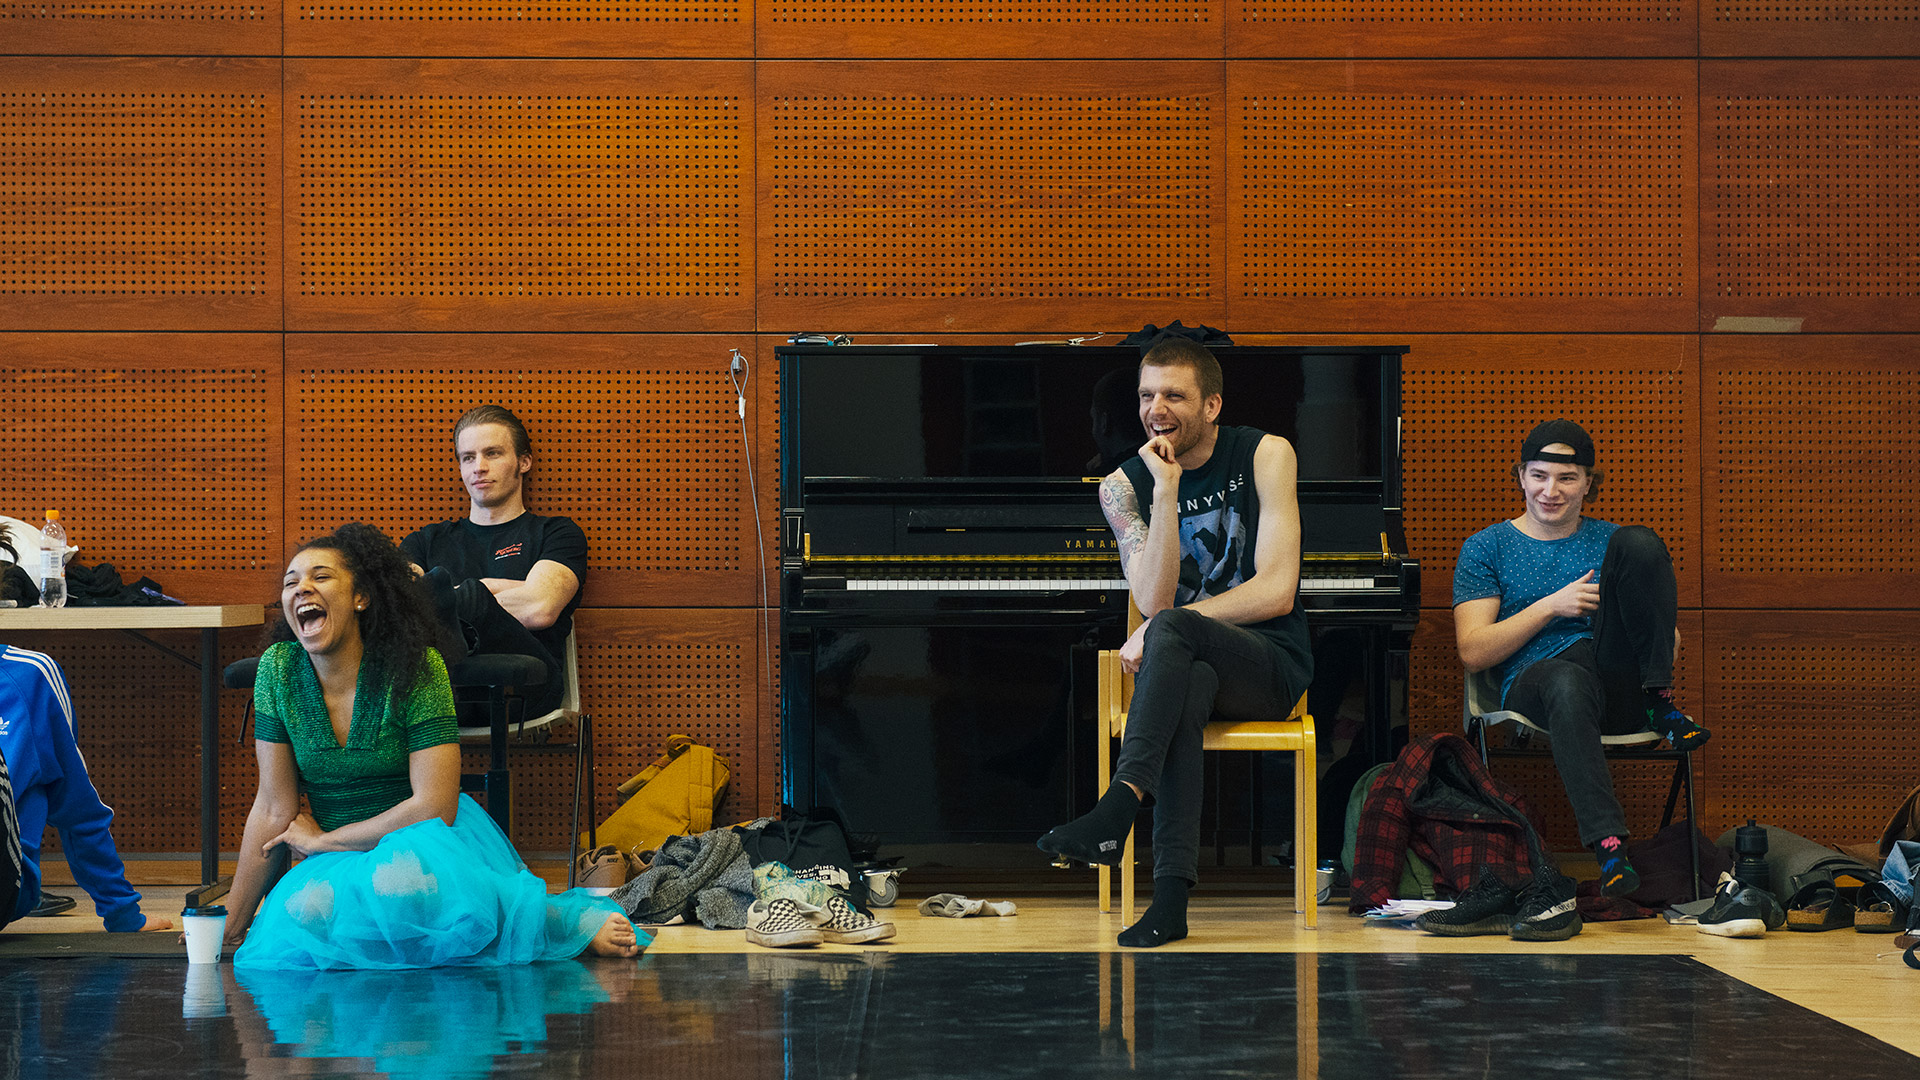 Smalla group of students sitting in a rehearsal space. Some sitting in chairs, one sitting on the floor, laughing. A black piano is in the background.